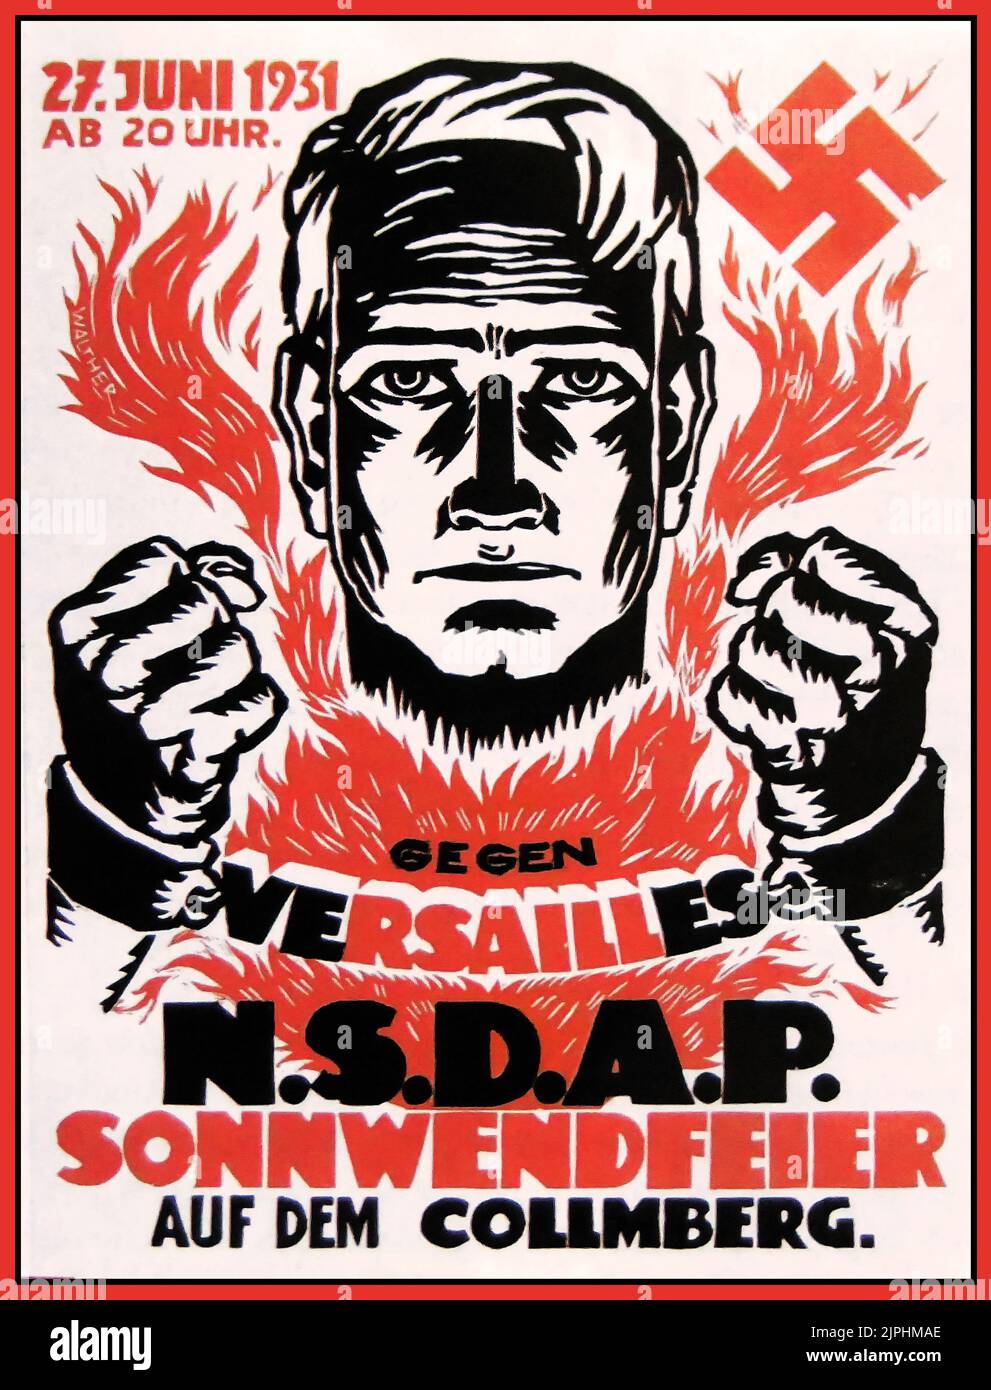 Vintage 1931 Nazi Poster “Gegen Versailles” (Against Versailles). A advertising Poster for a midsummer festival on 27 June 1931 organized by the NSDAP on Collmberg near Leipzig. Nazi Germany Stock Photo